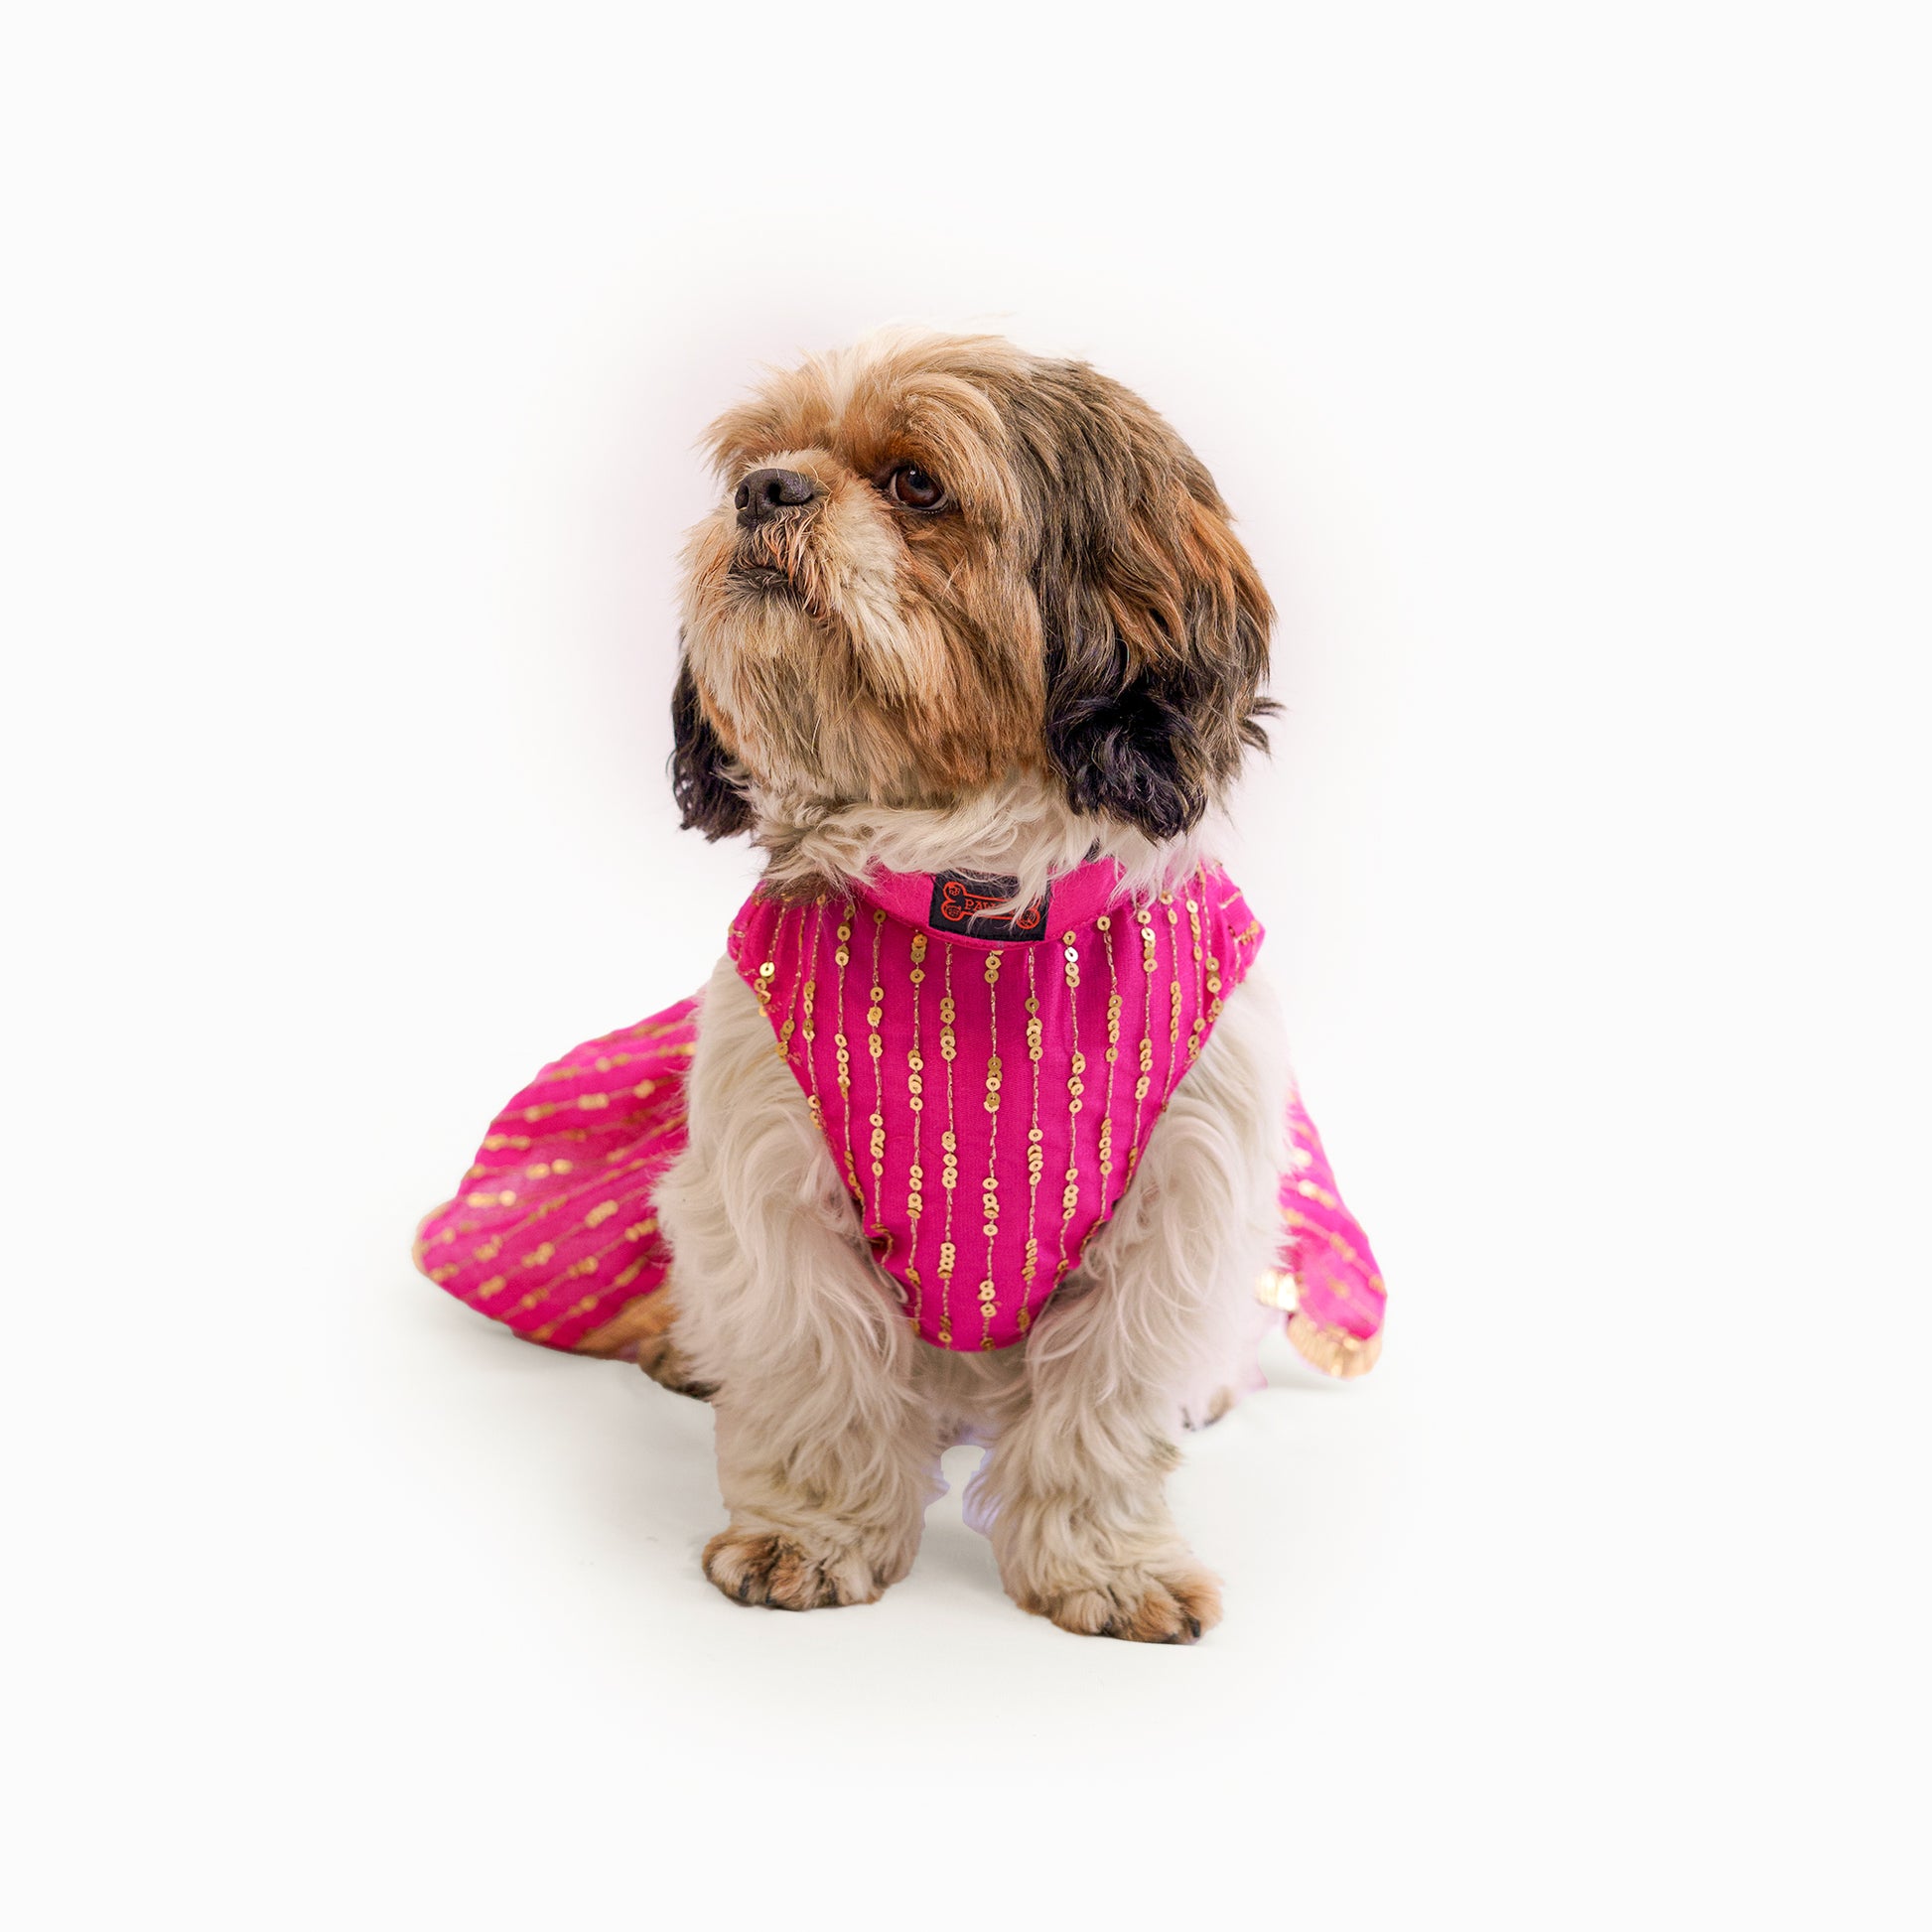 Pawgy Pets Hot Pink Net Lehenga for Dogs & Cats